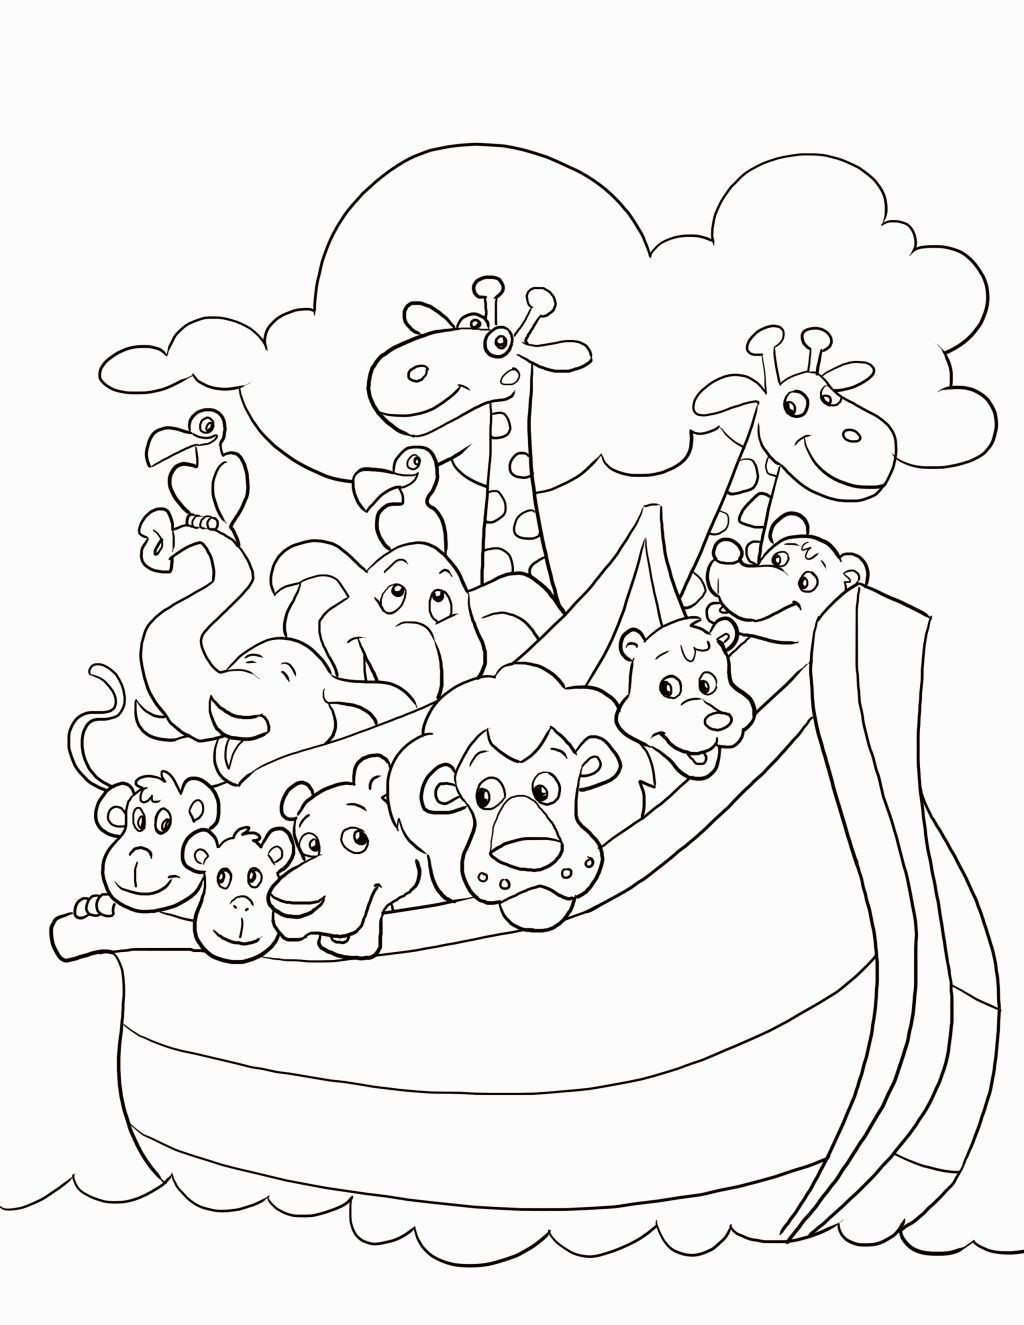 Kids Christian Coloring Pages
 Christian Coloring Pages For Preschoolers